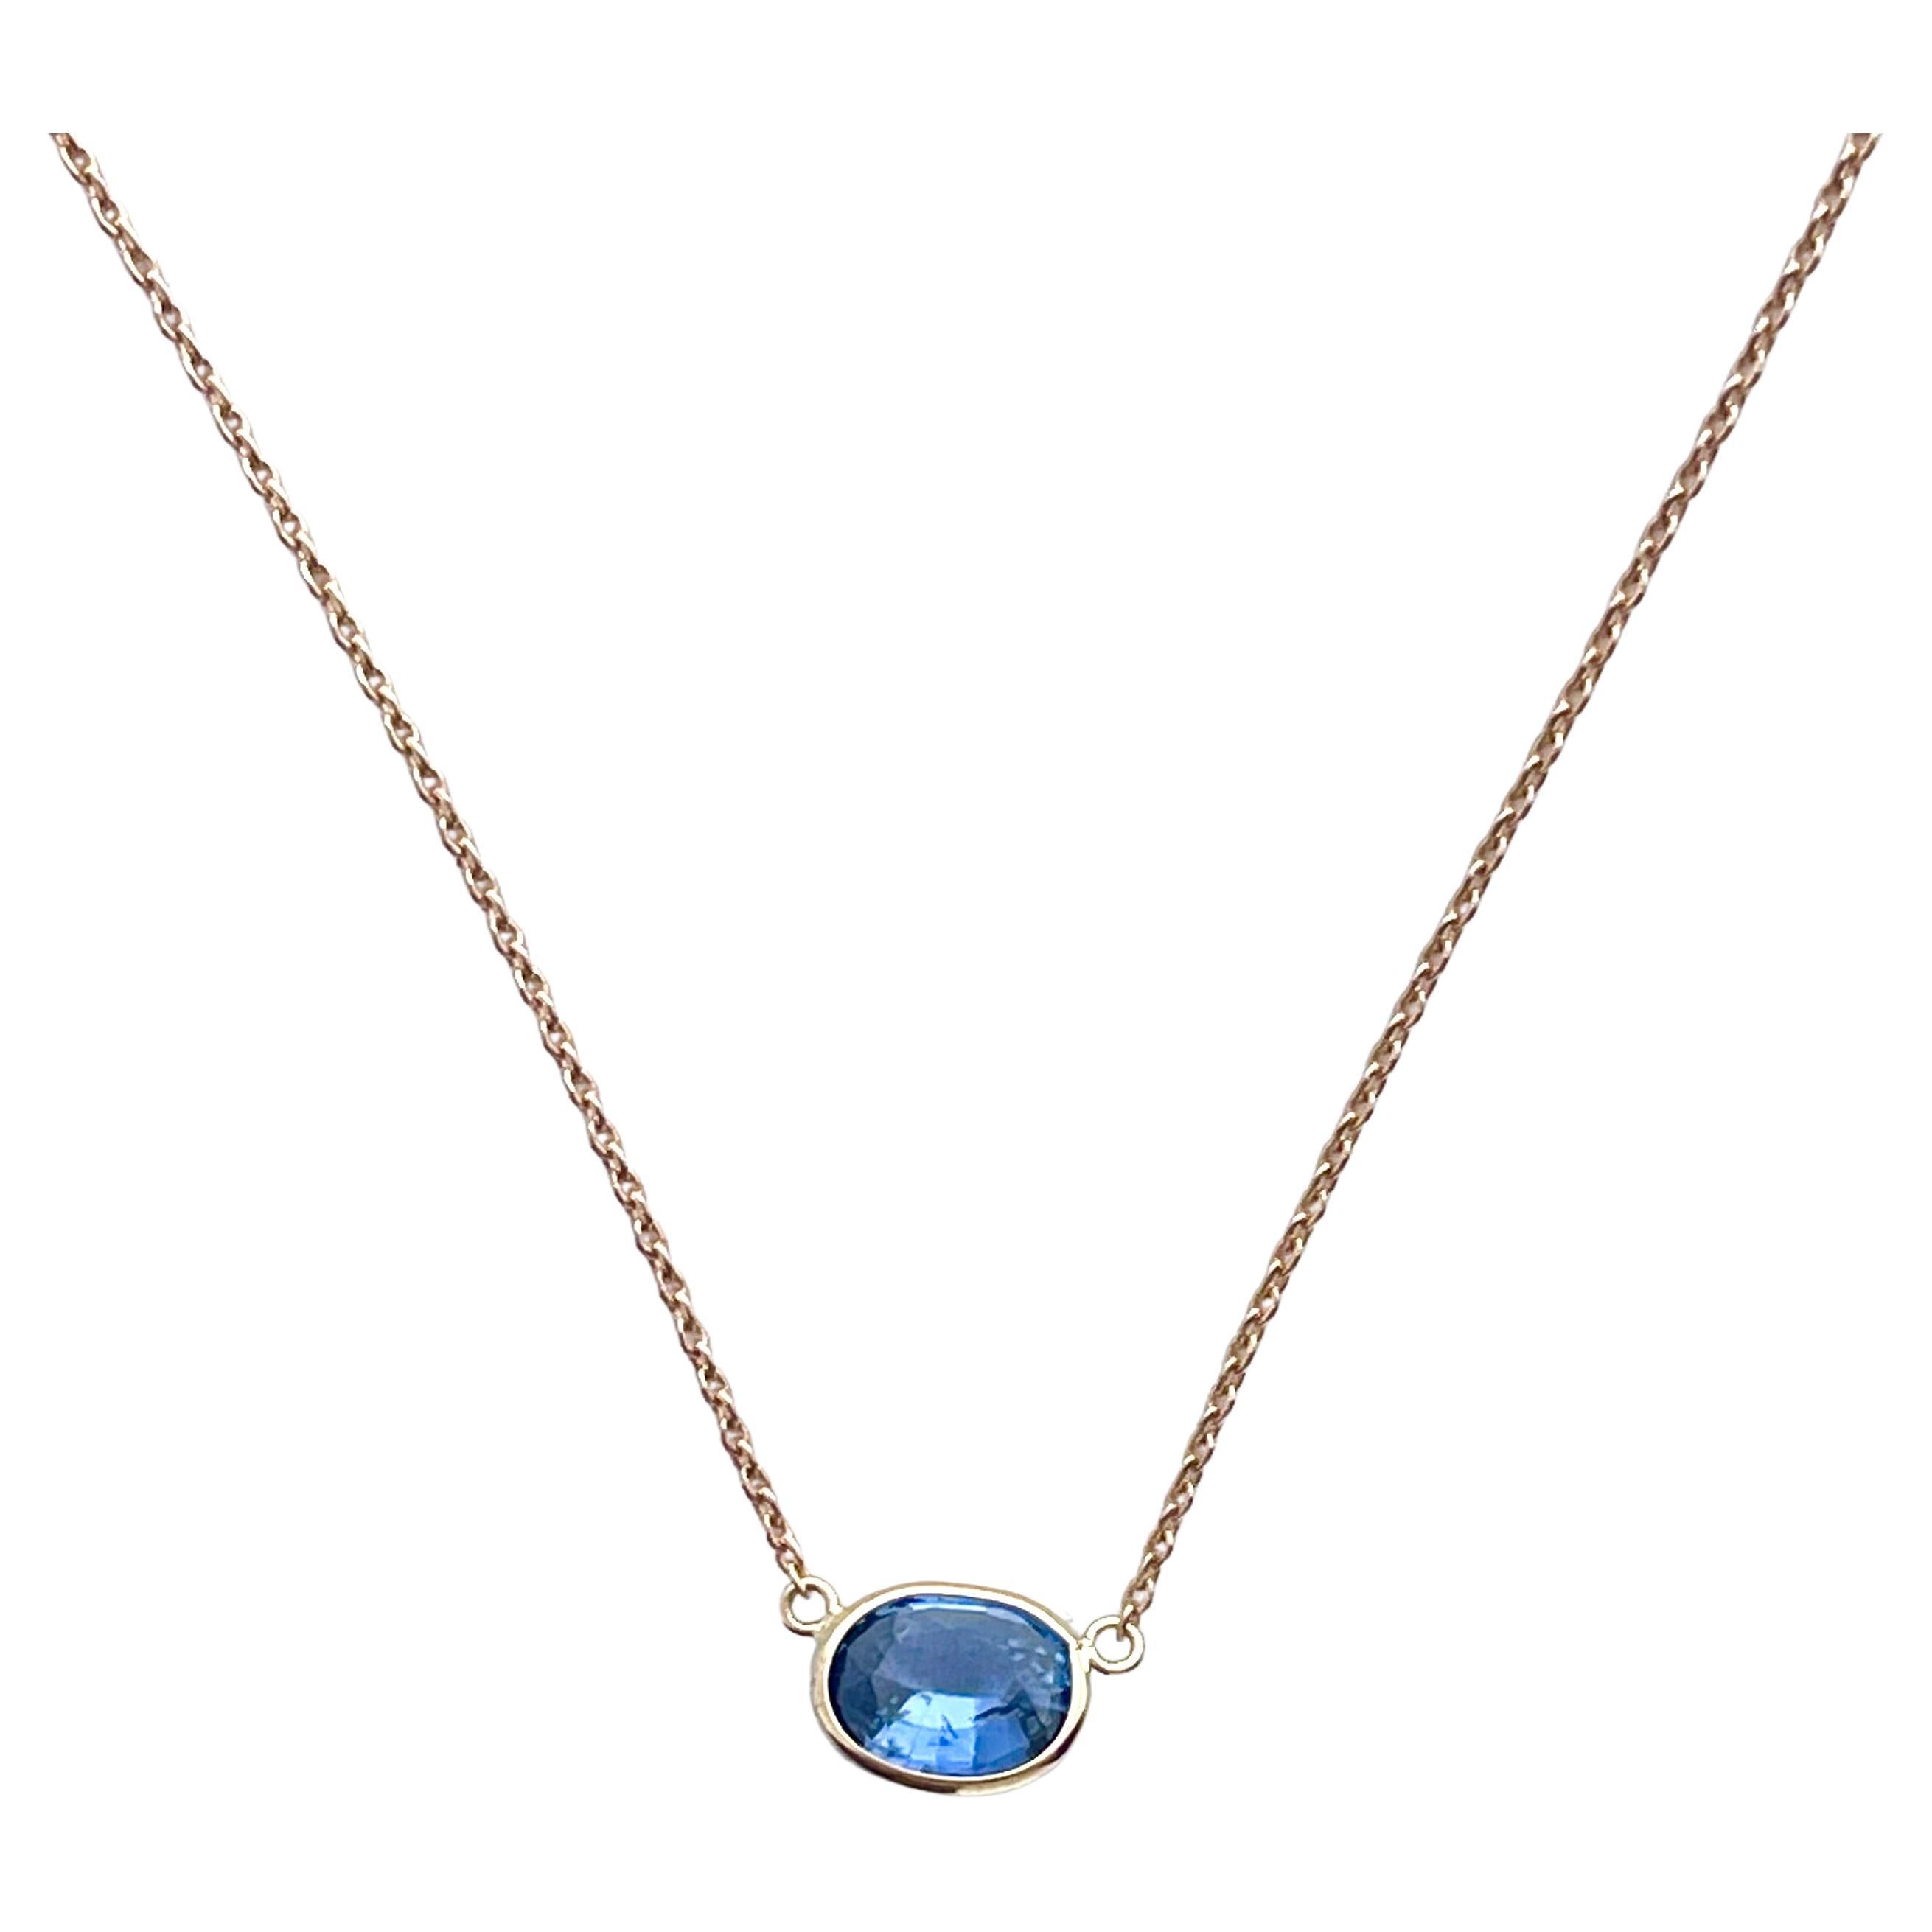 1.42 Carat Weight Blue Sapphire Oval Cut Solitaire Necklace in 14k Rose Gold 